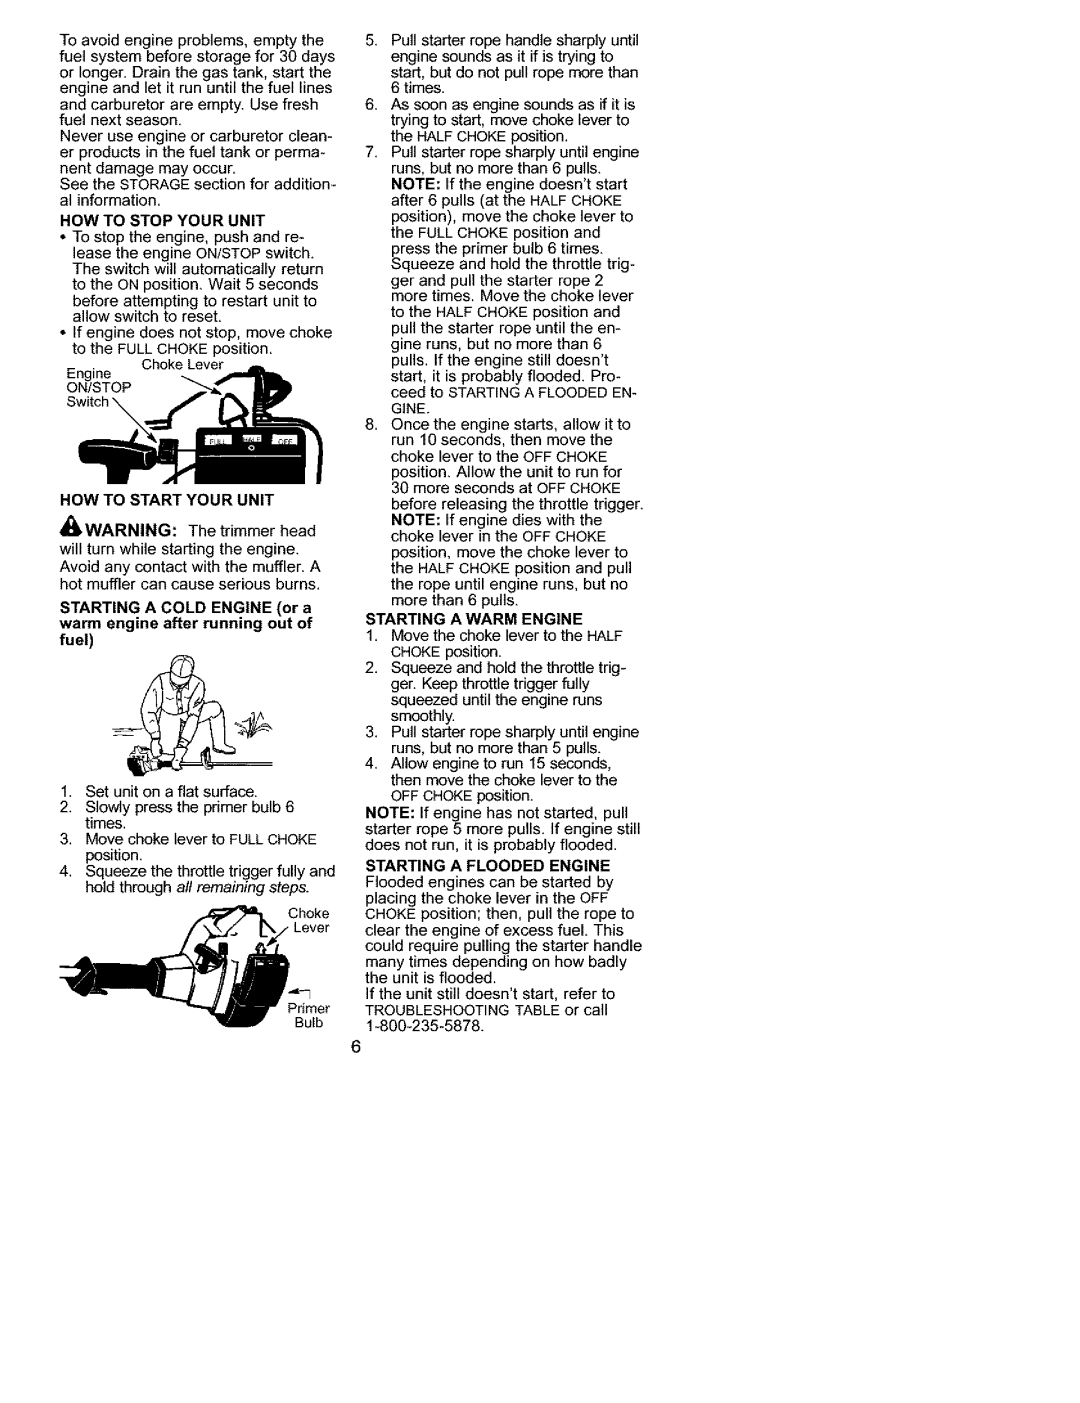 Craftsman 358.745511 instruction manual How To Start Your Unit, Starting A Warm Engine, 1, Move the choke lever to the HALF 